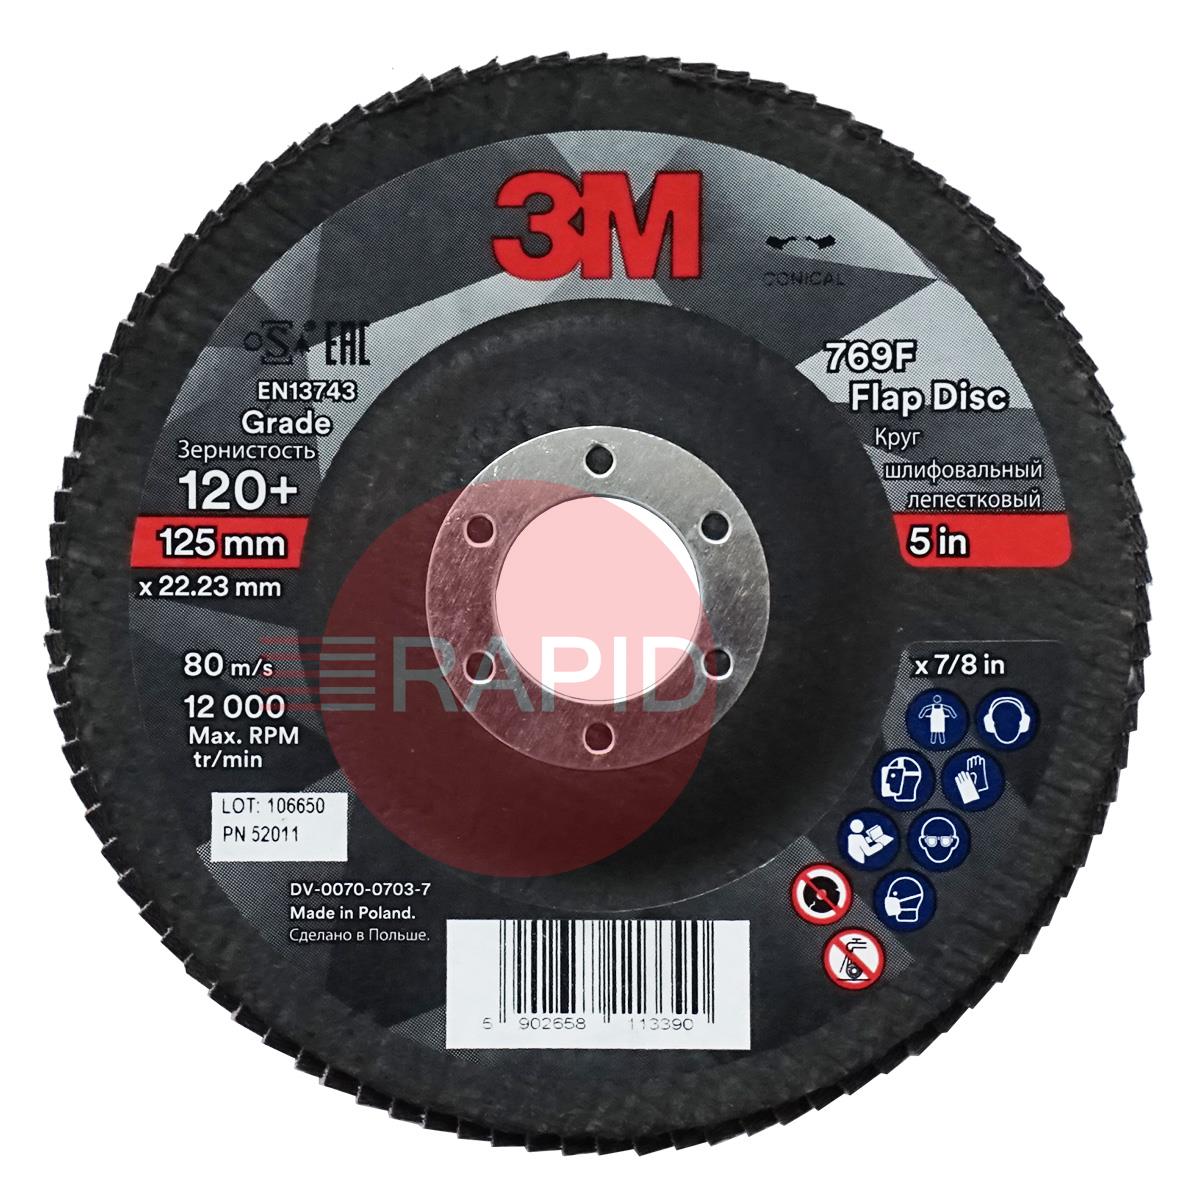 3M-52011  3M Silver Conical Flap Disc 769F 125mm x 22.23mm, 120+ Grit (Box of 10)